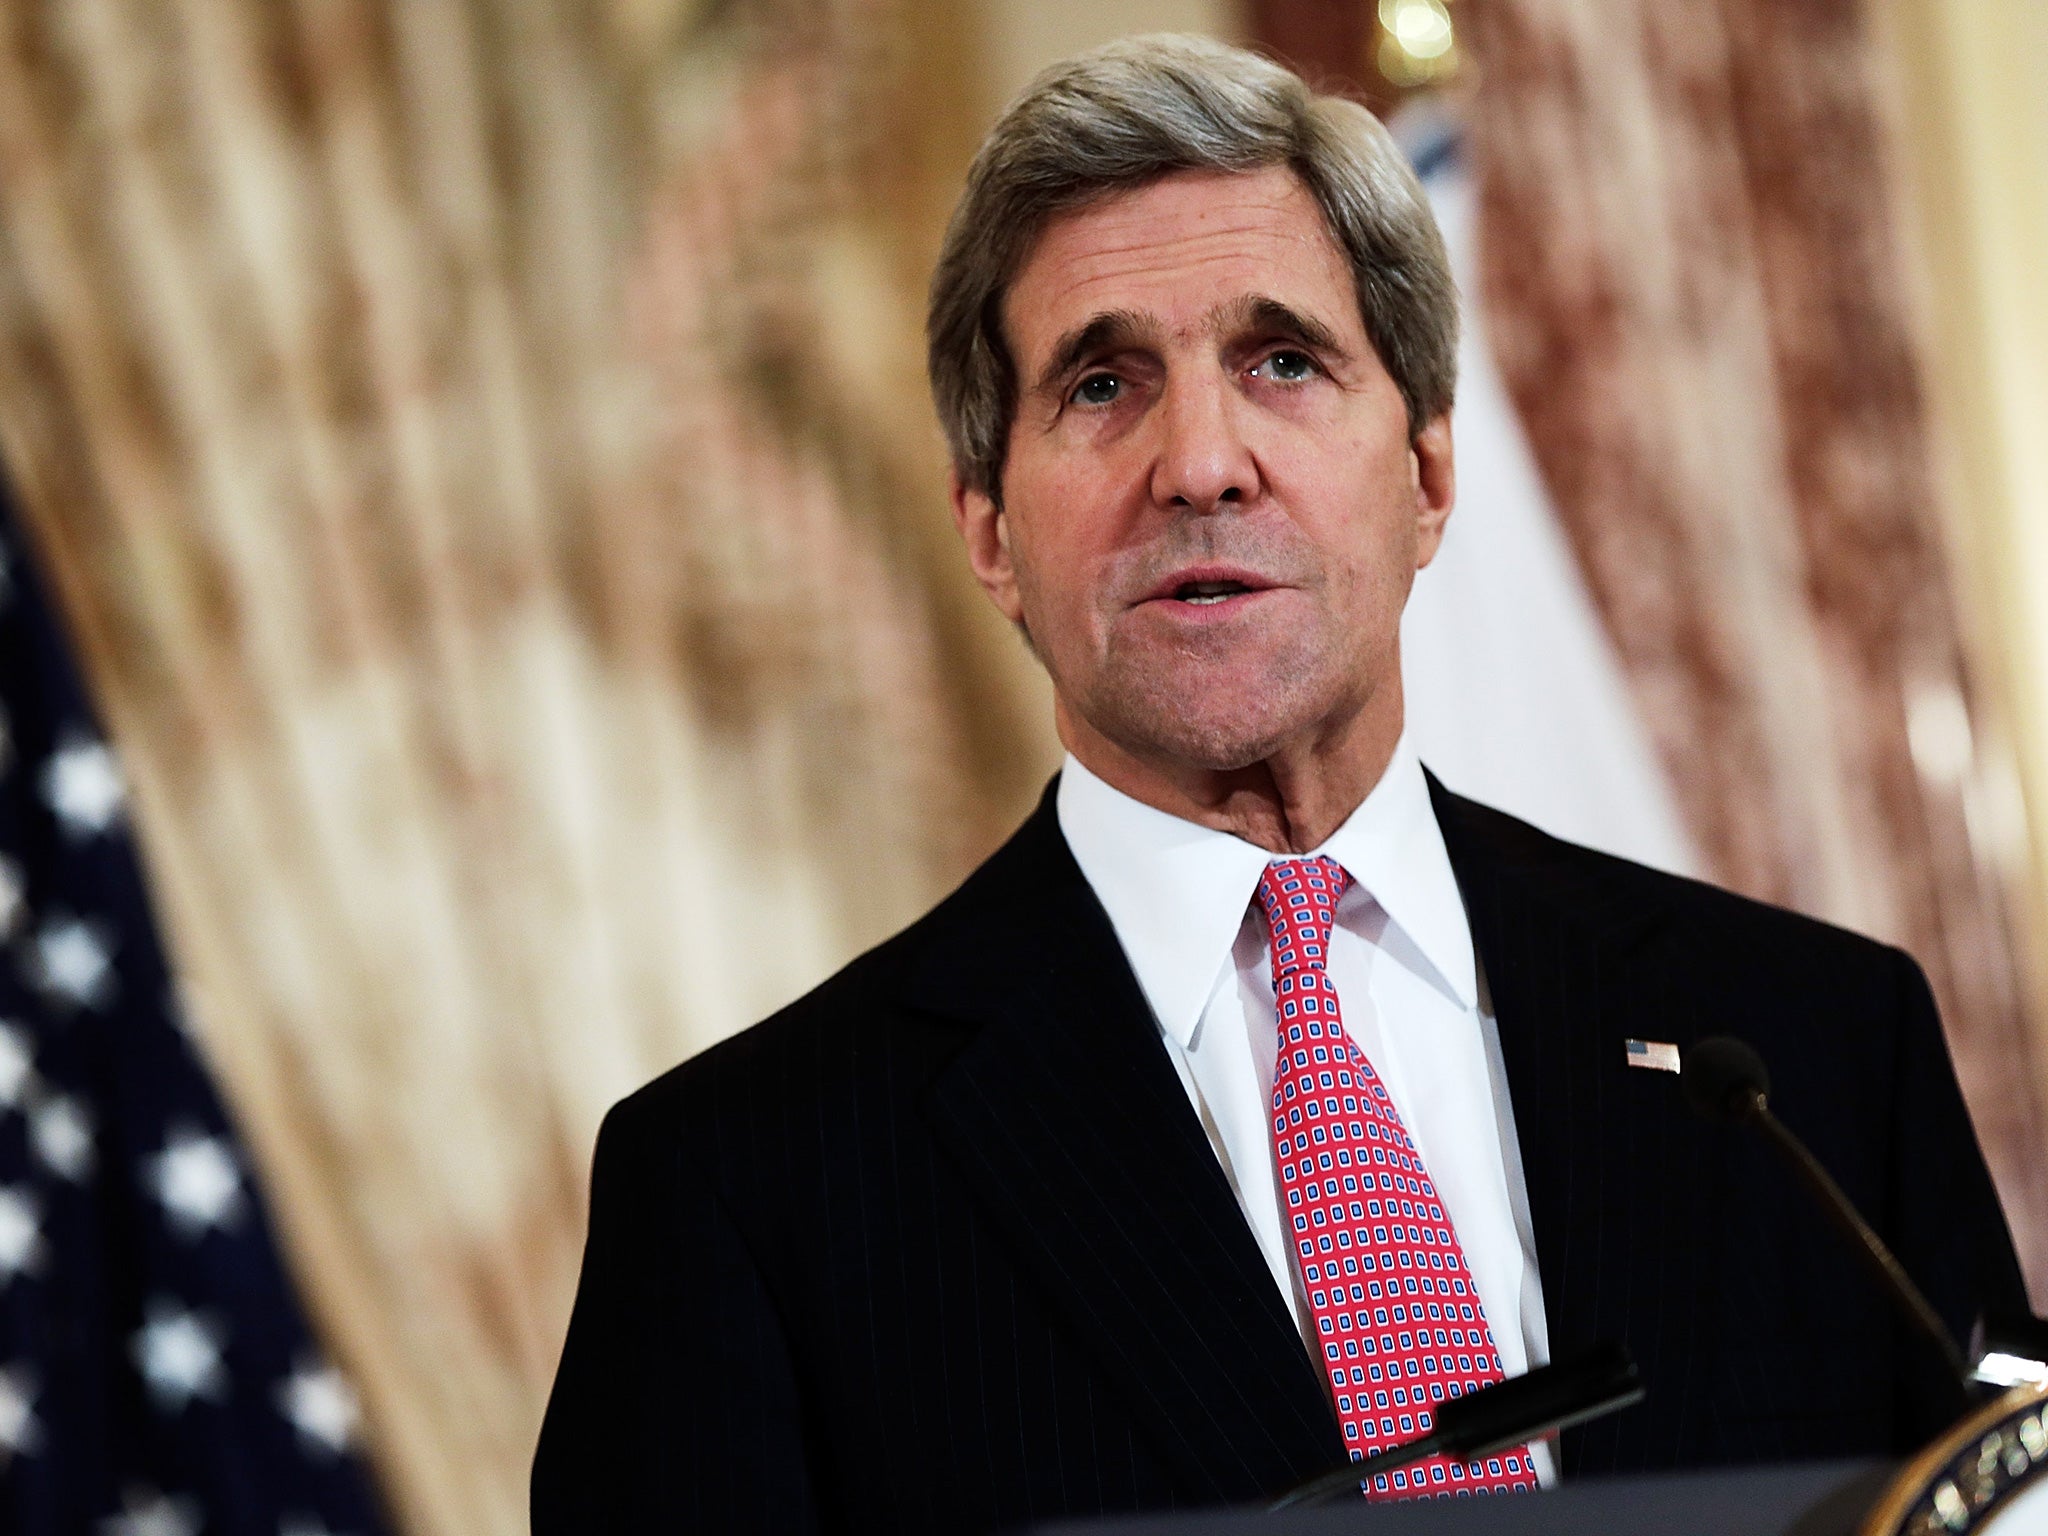 John Kerry has been quick to reassure the Saudi royal family